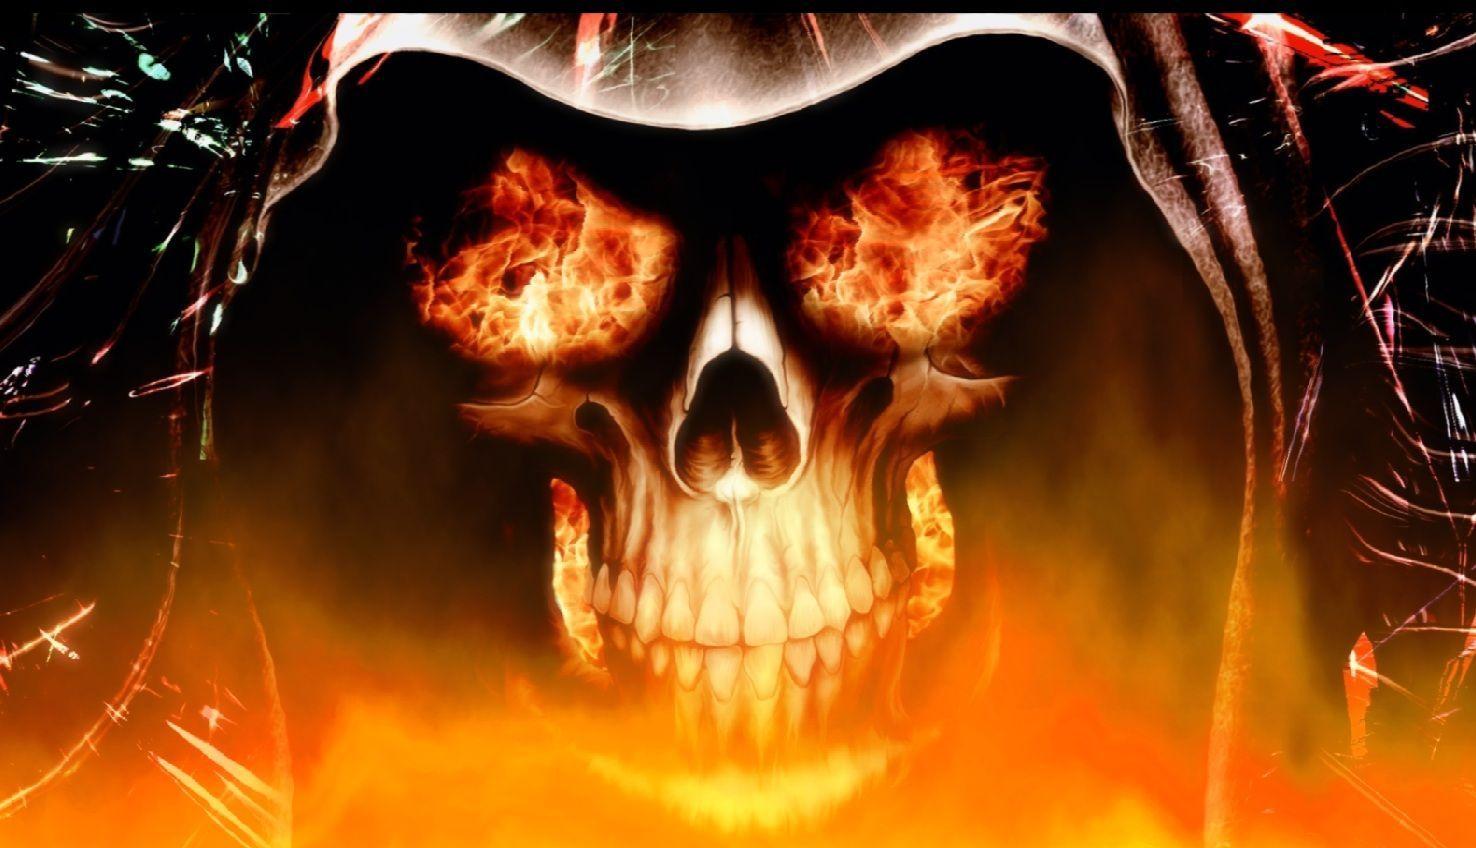 Download Fire Skull Animated Wallpapers